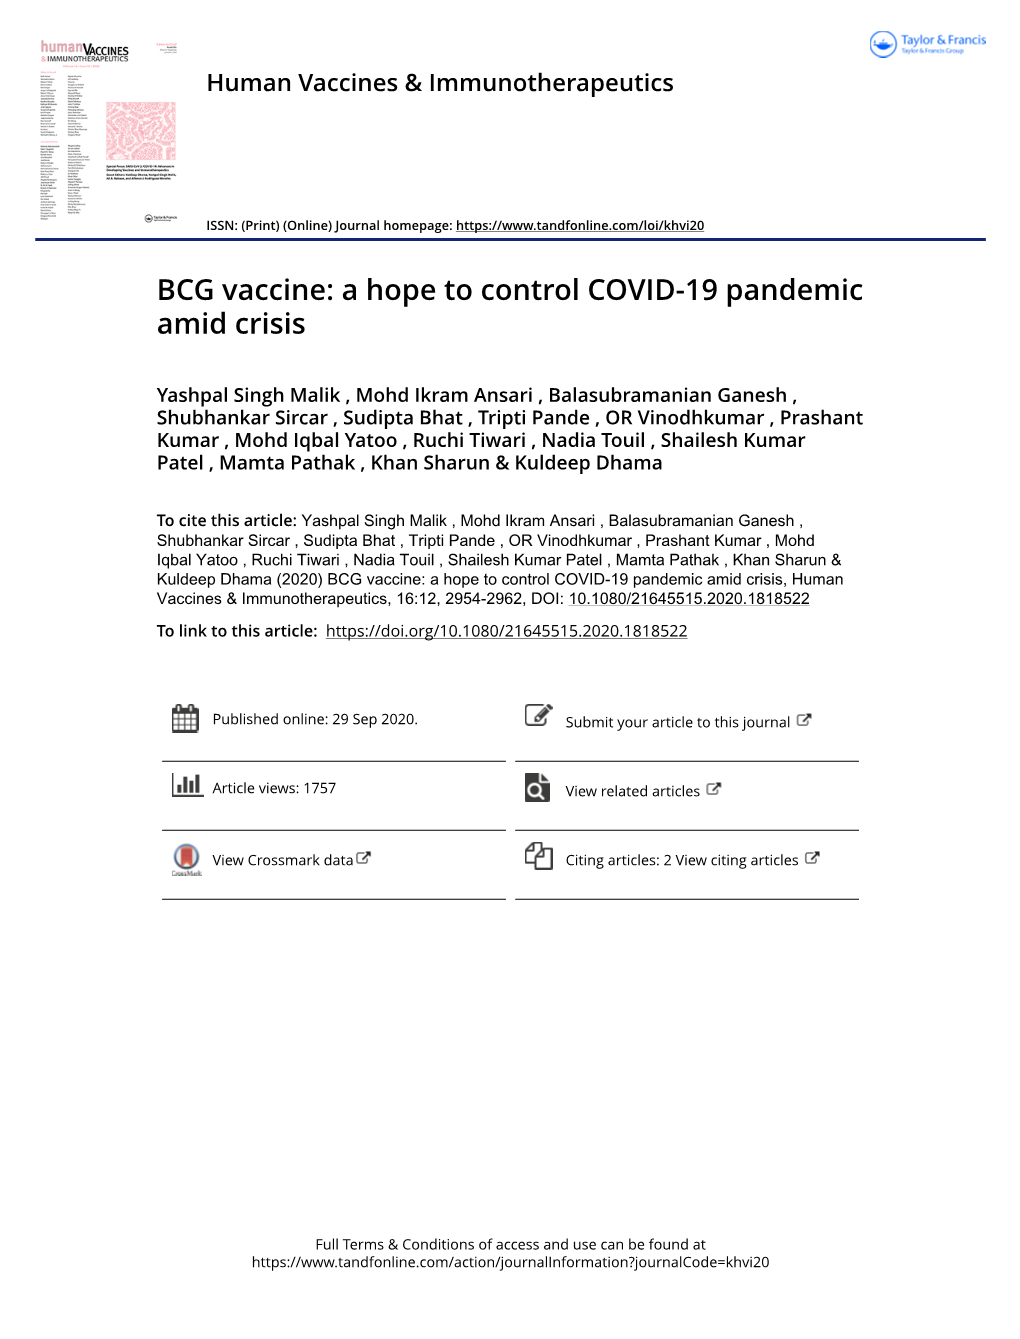 BCG Vaccine: a Hope to Control COVID-19 Pandemic Amid Crisis